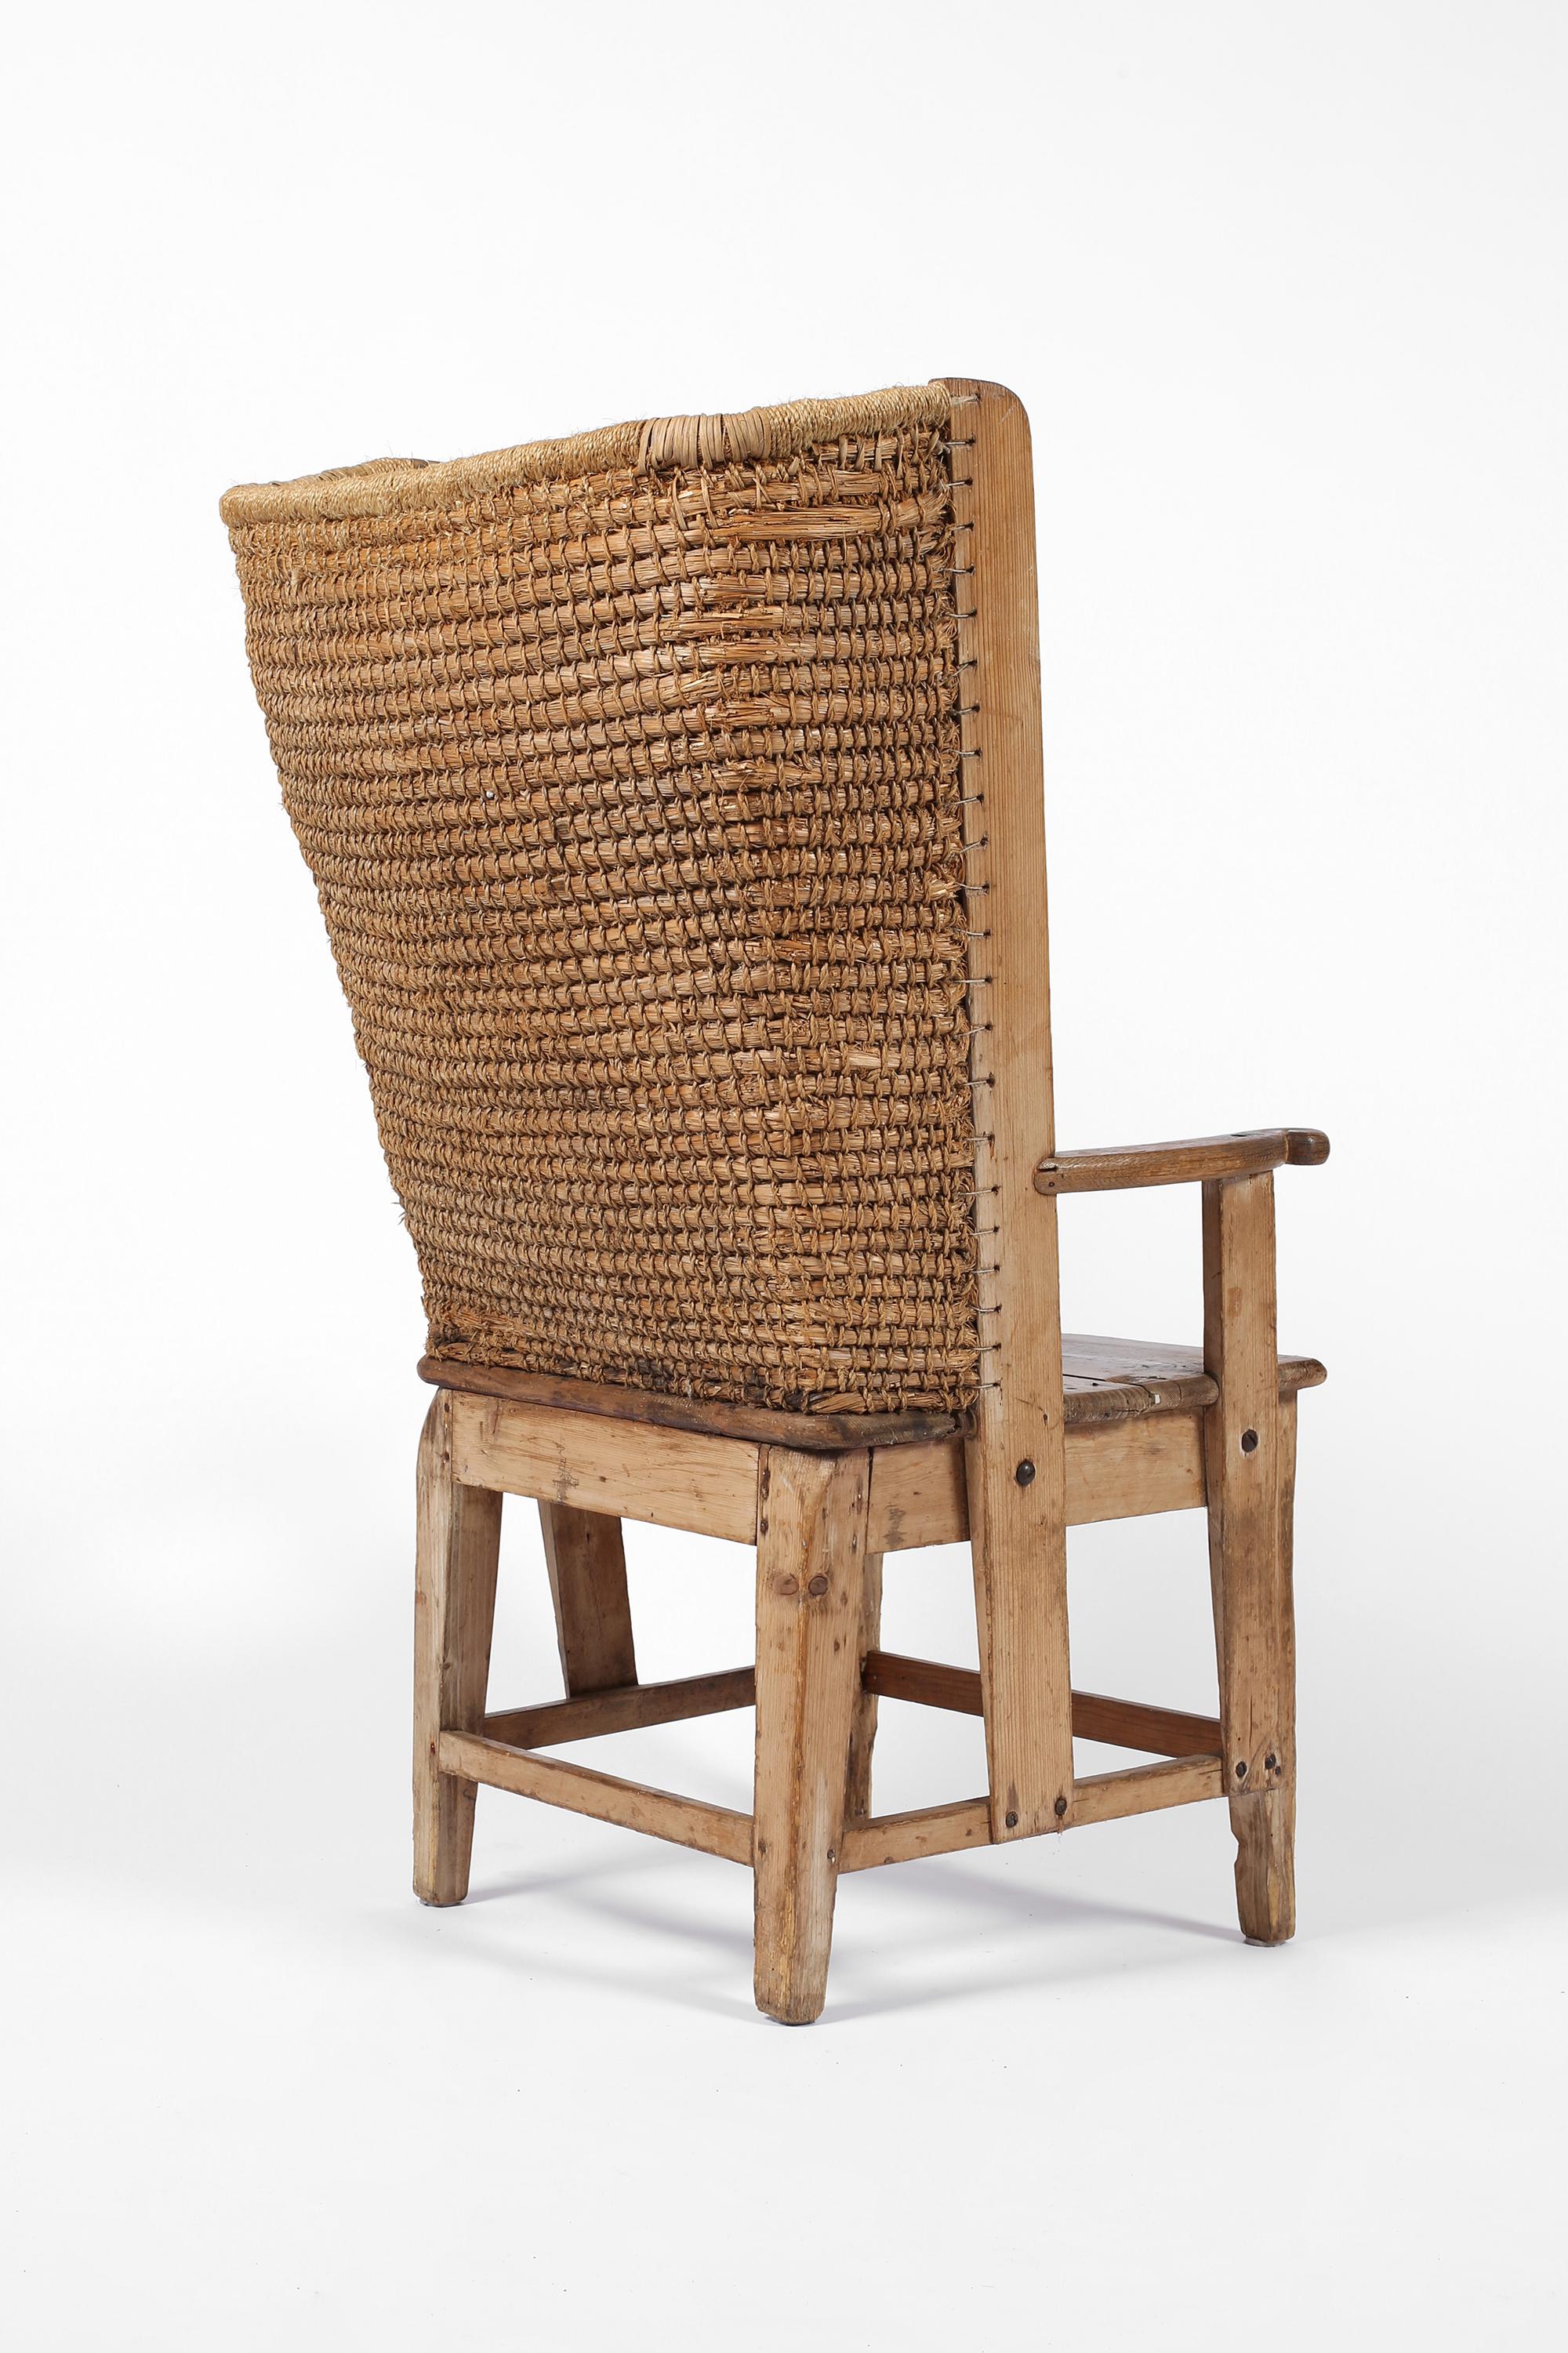 Late 19th Century Scottish Vernacular Pine and Woven Straw Orkney Chair 12